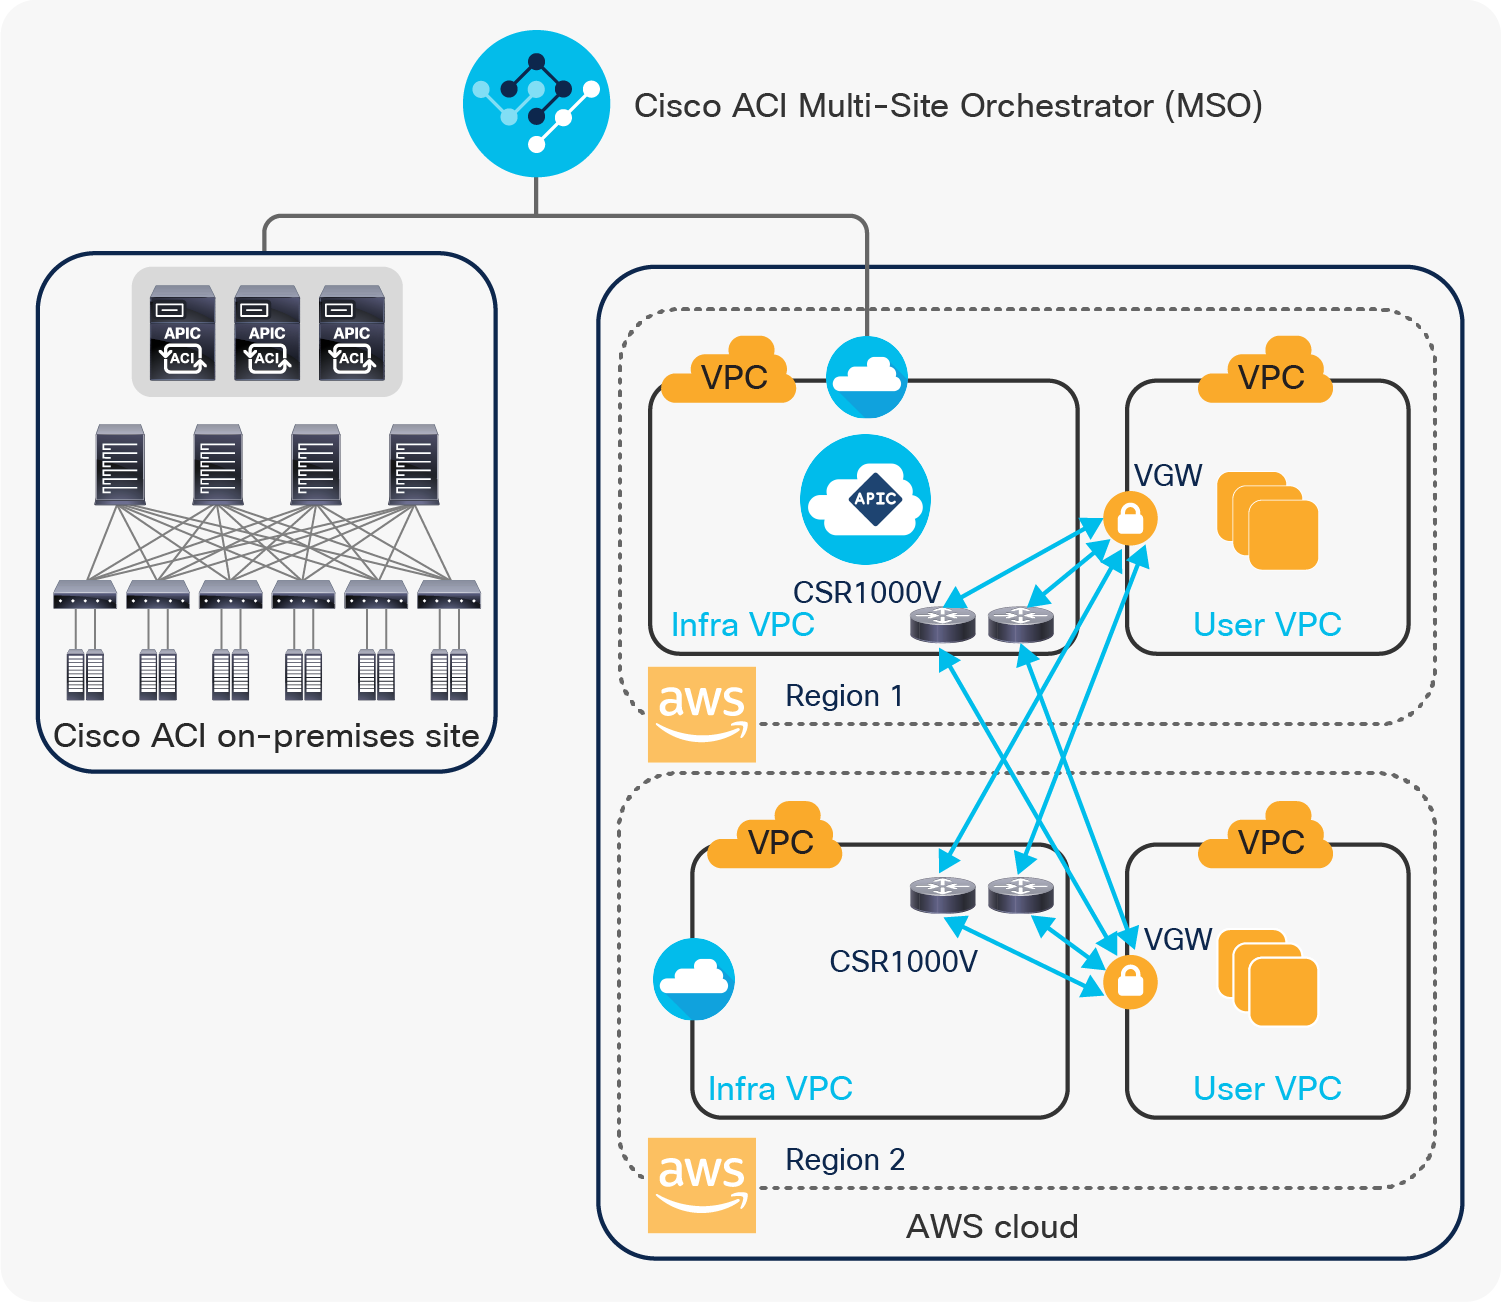 Cisco Cloud ACI AWS multi-region site with regional dedicated Infra VPC using IPsec tunnels with VGW